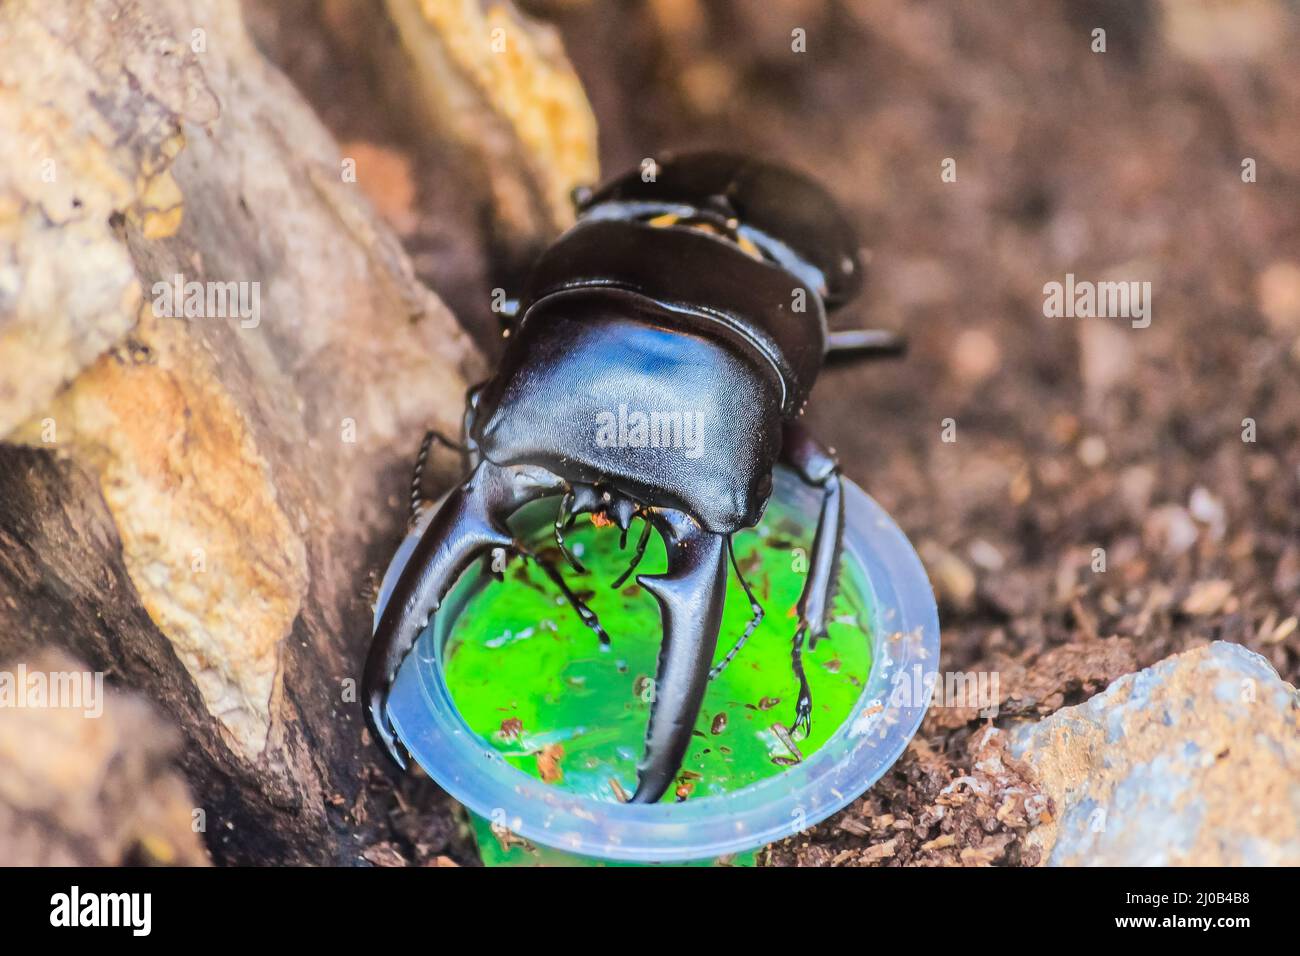 Zoom in the Black Scarab Beetle Eating Stock Photo